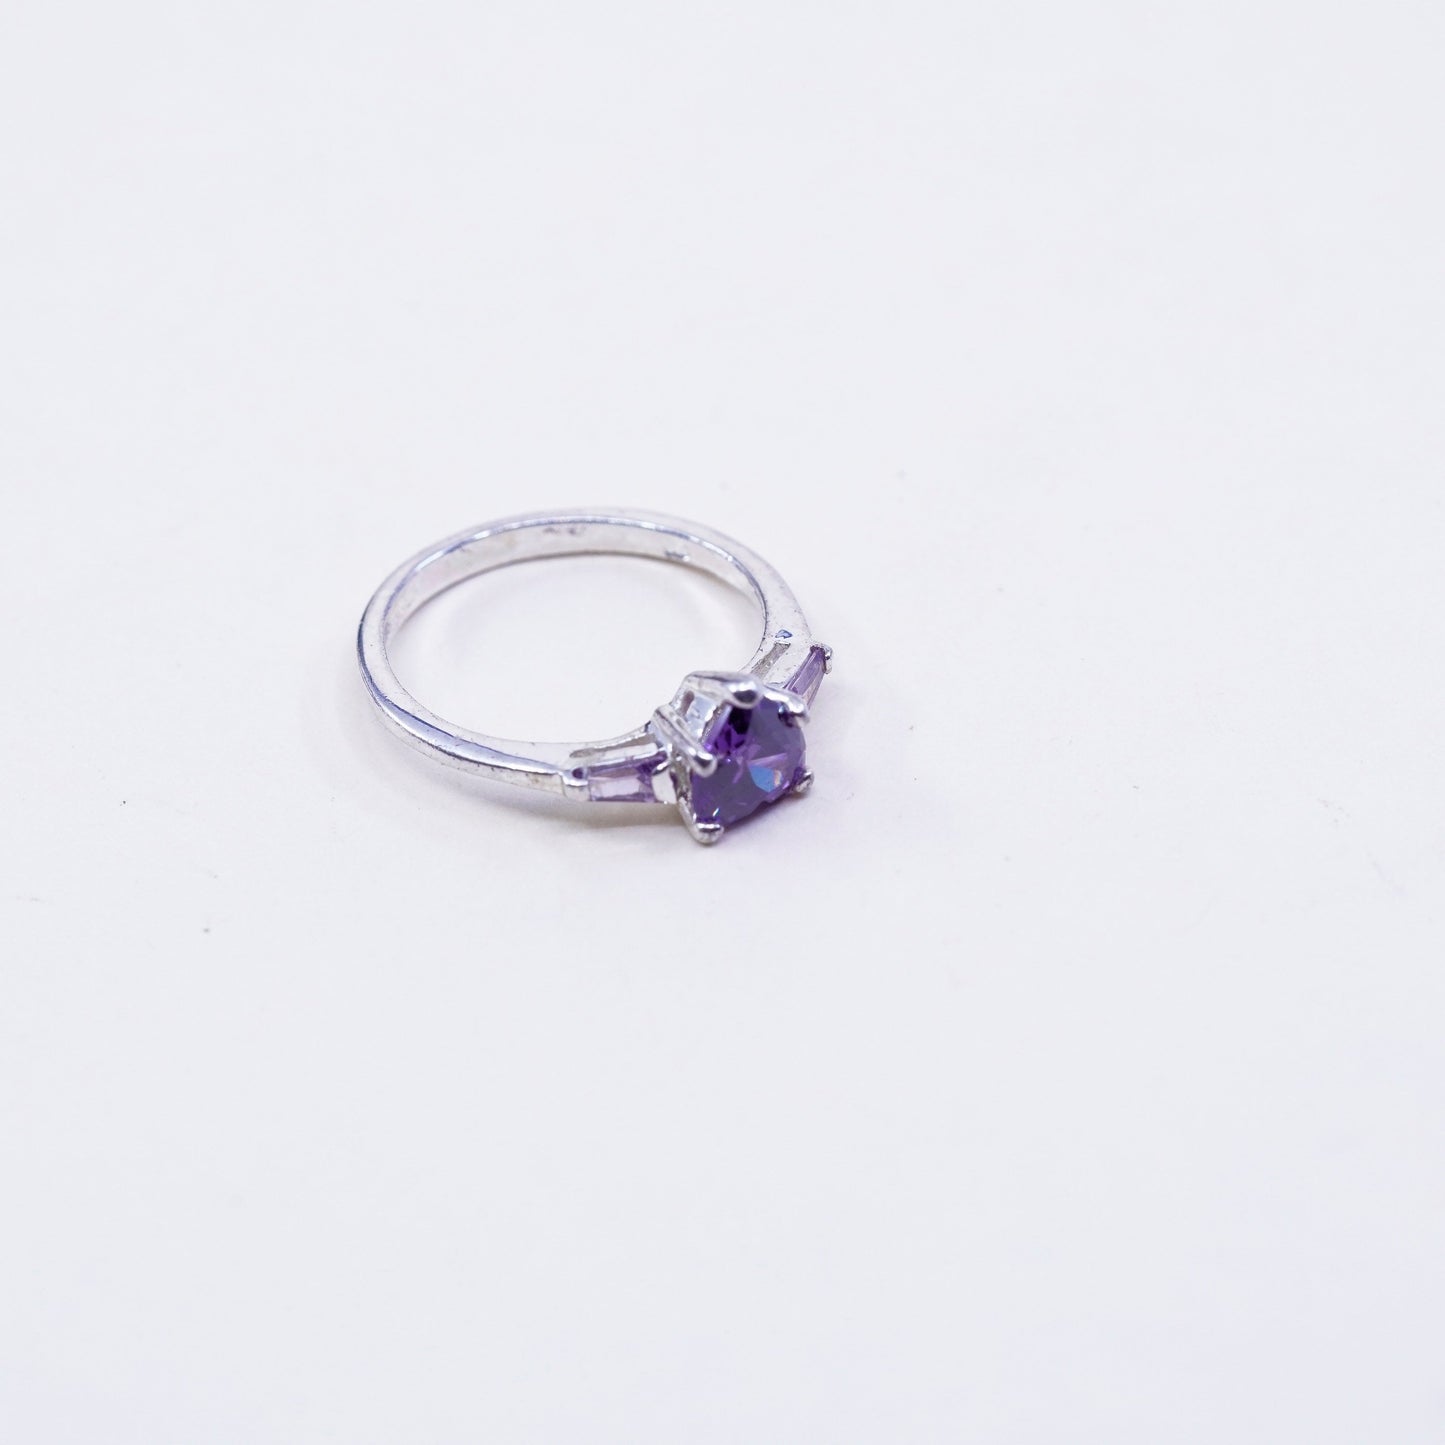 Size 6.25, vintage Sterling 925 silver ring with amethyst heart and Cz